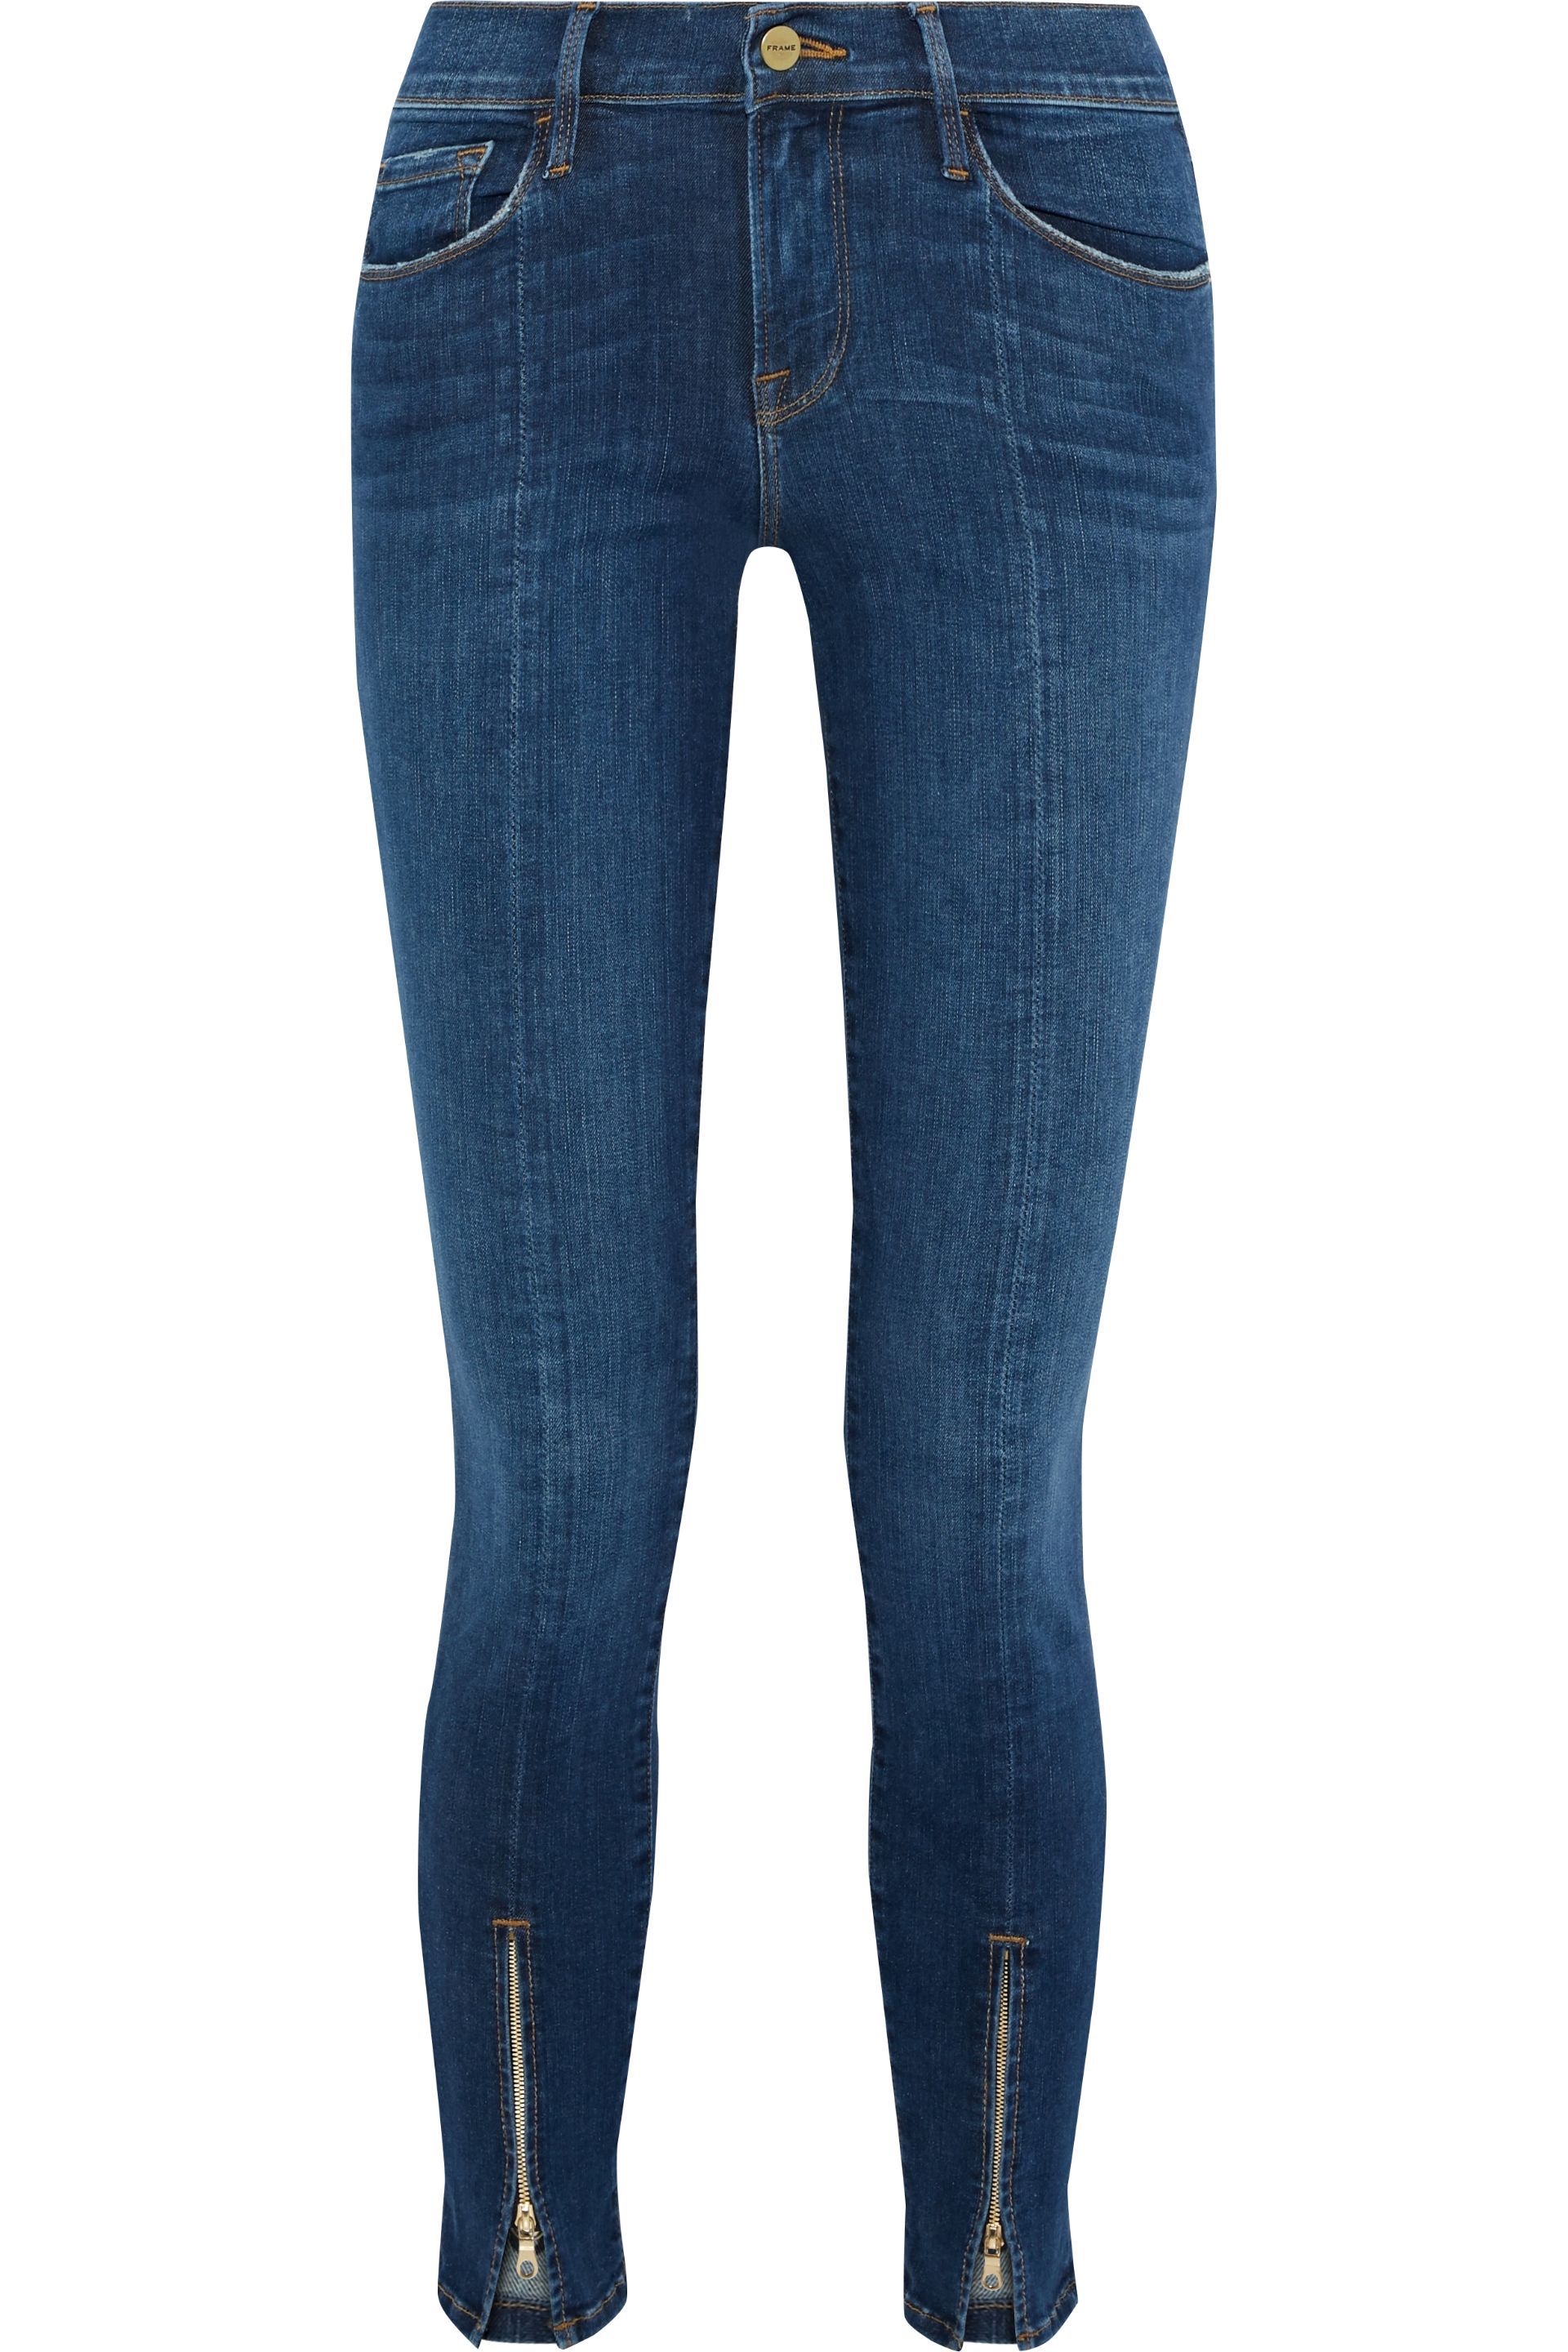 Ladies Designer Jeans | Sale Up To 70% Off At THE OUTNET